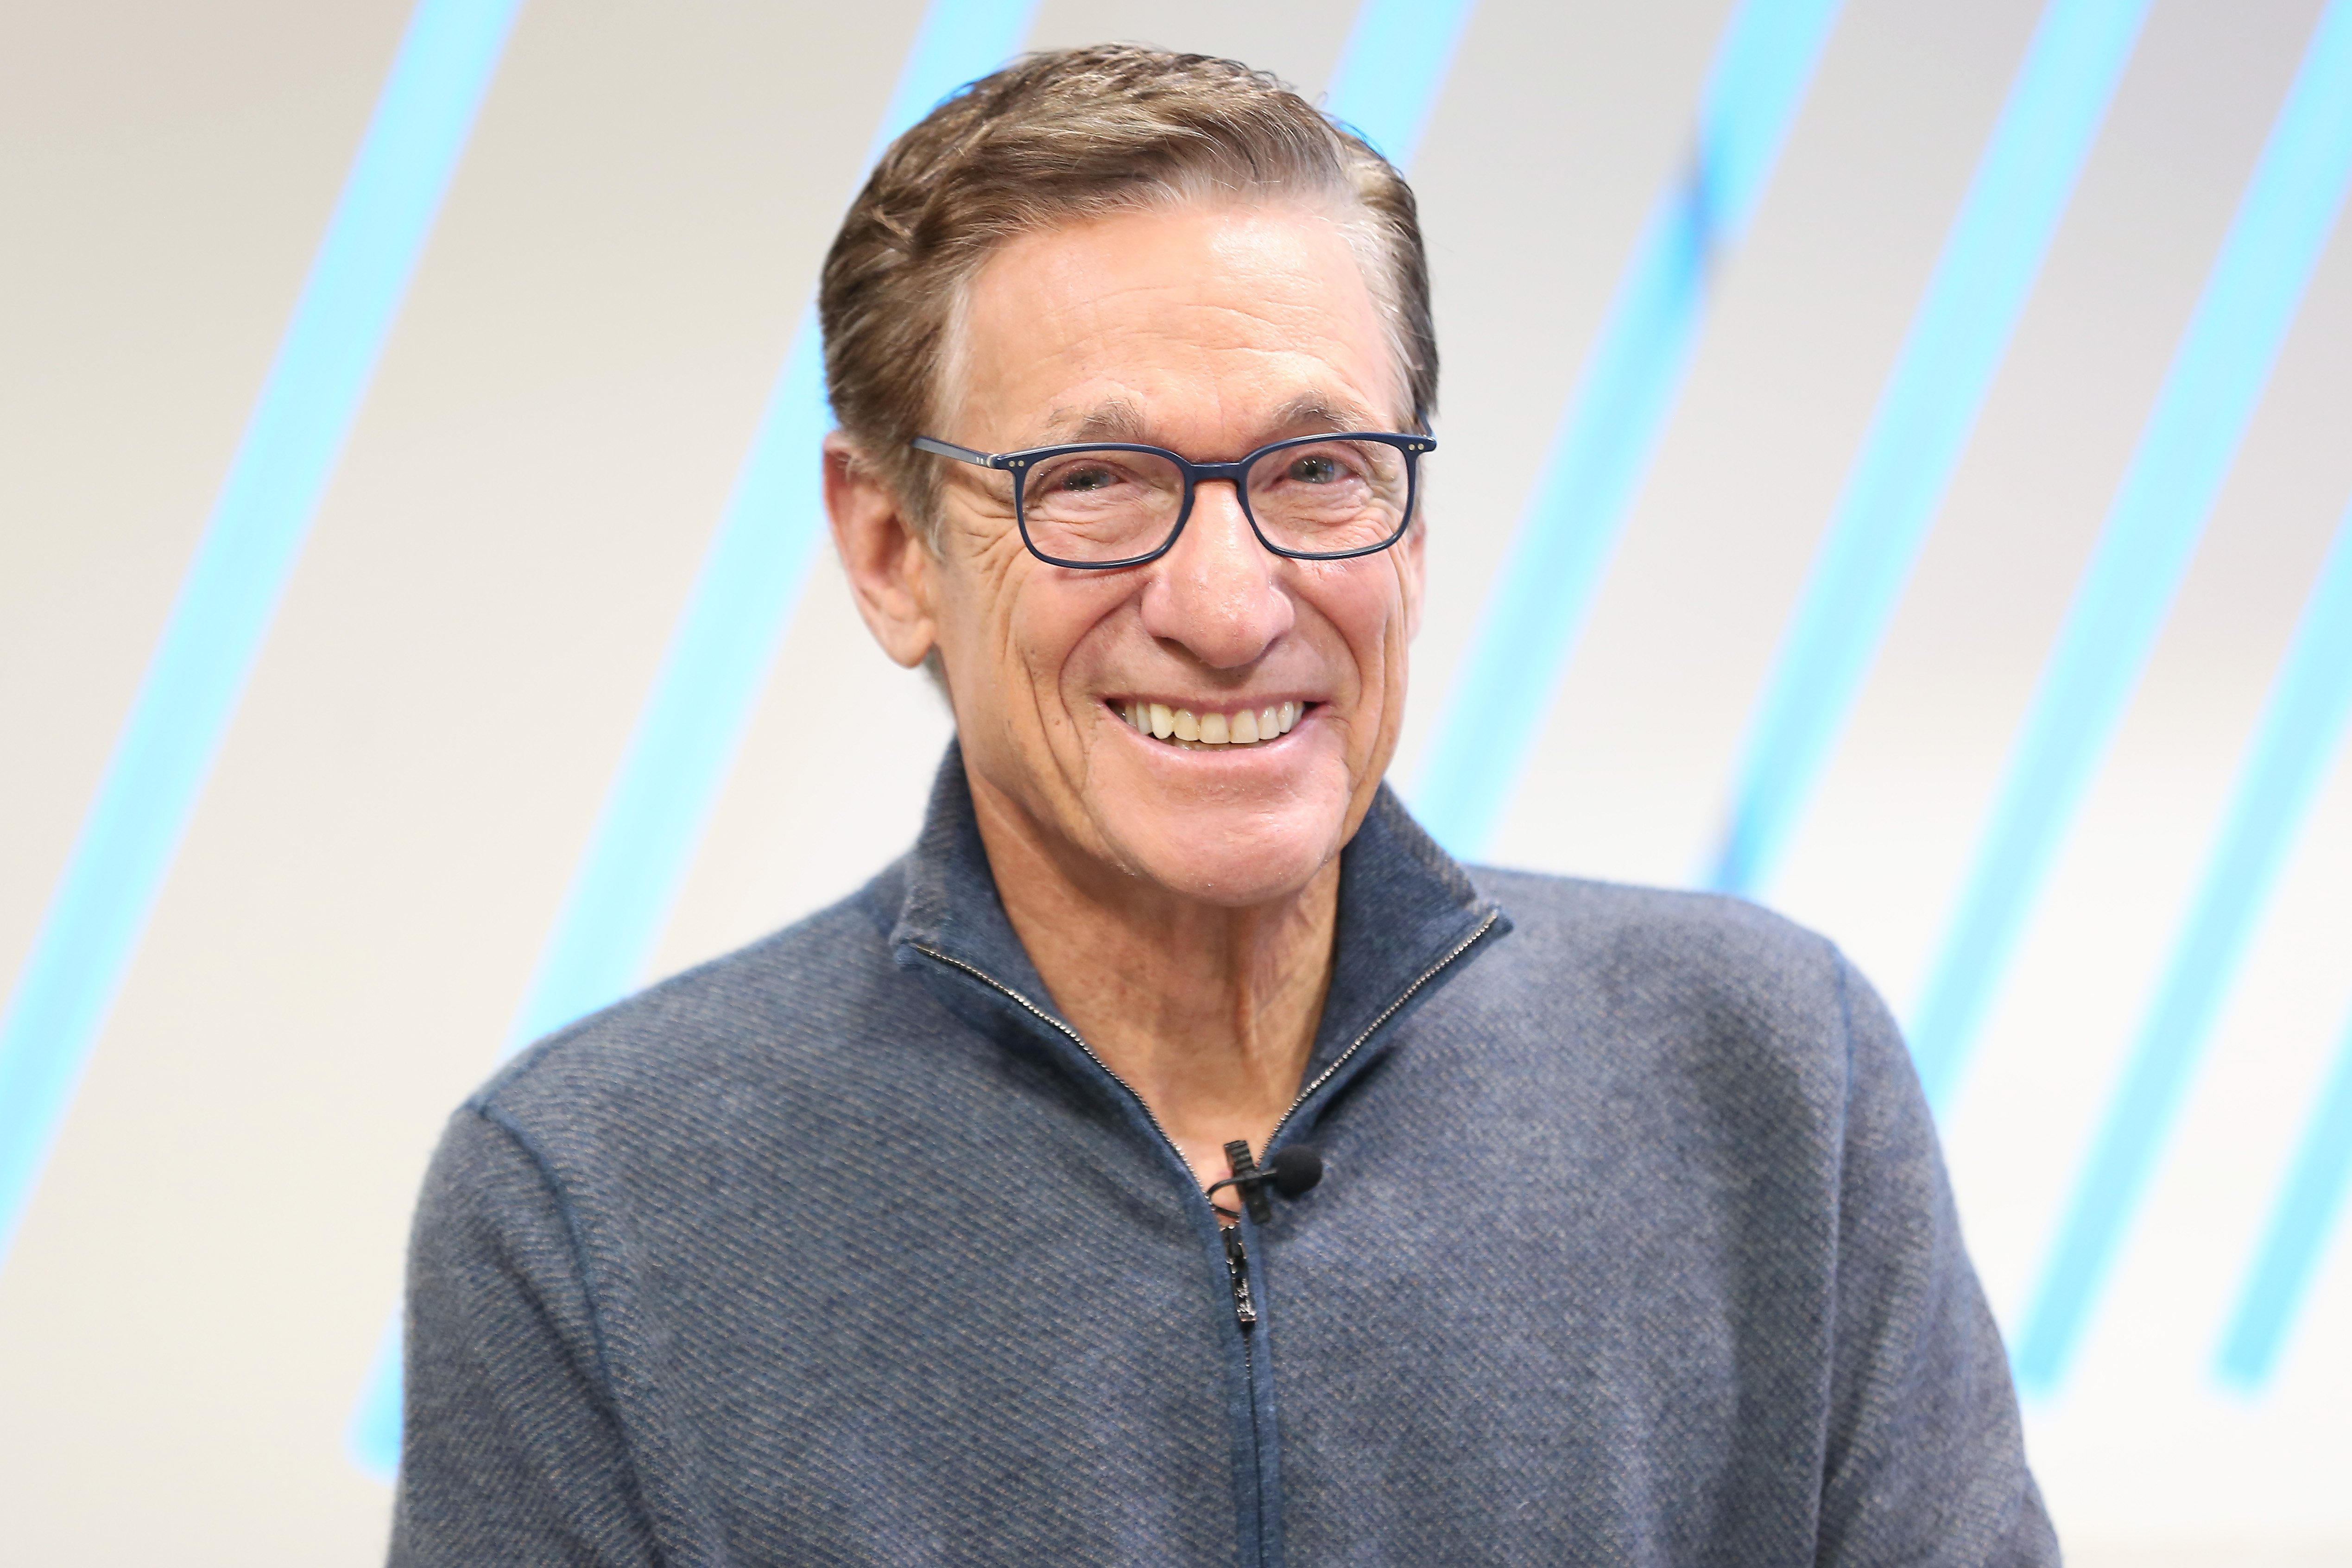 Maury Povich smiling during a visit to 'People Now'